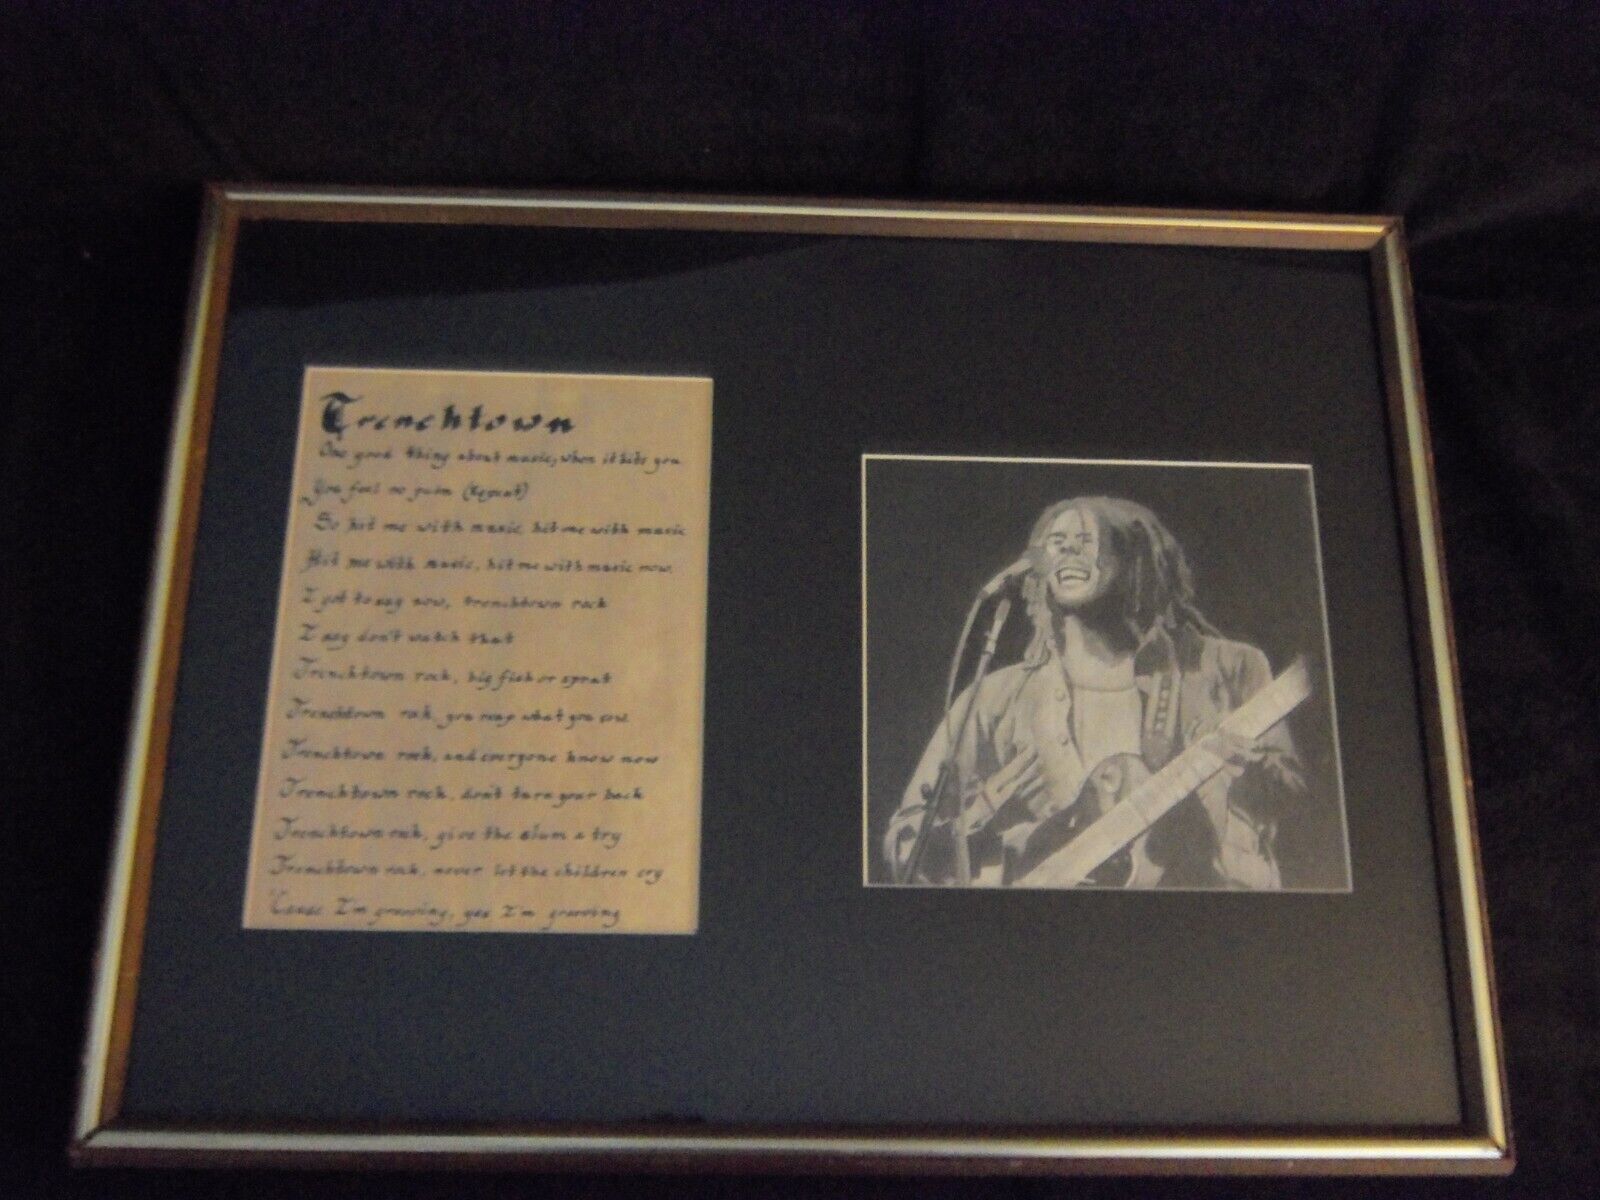 Primary image for BOB MARLEY TRENCHTOWN  FRAMED ART PIECE  25" X 19"  DATED 2000